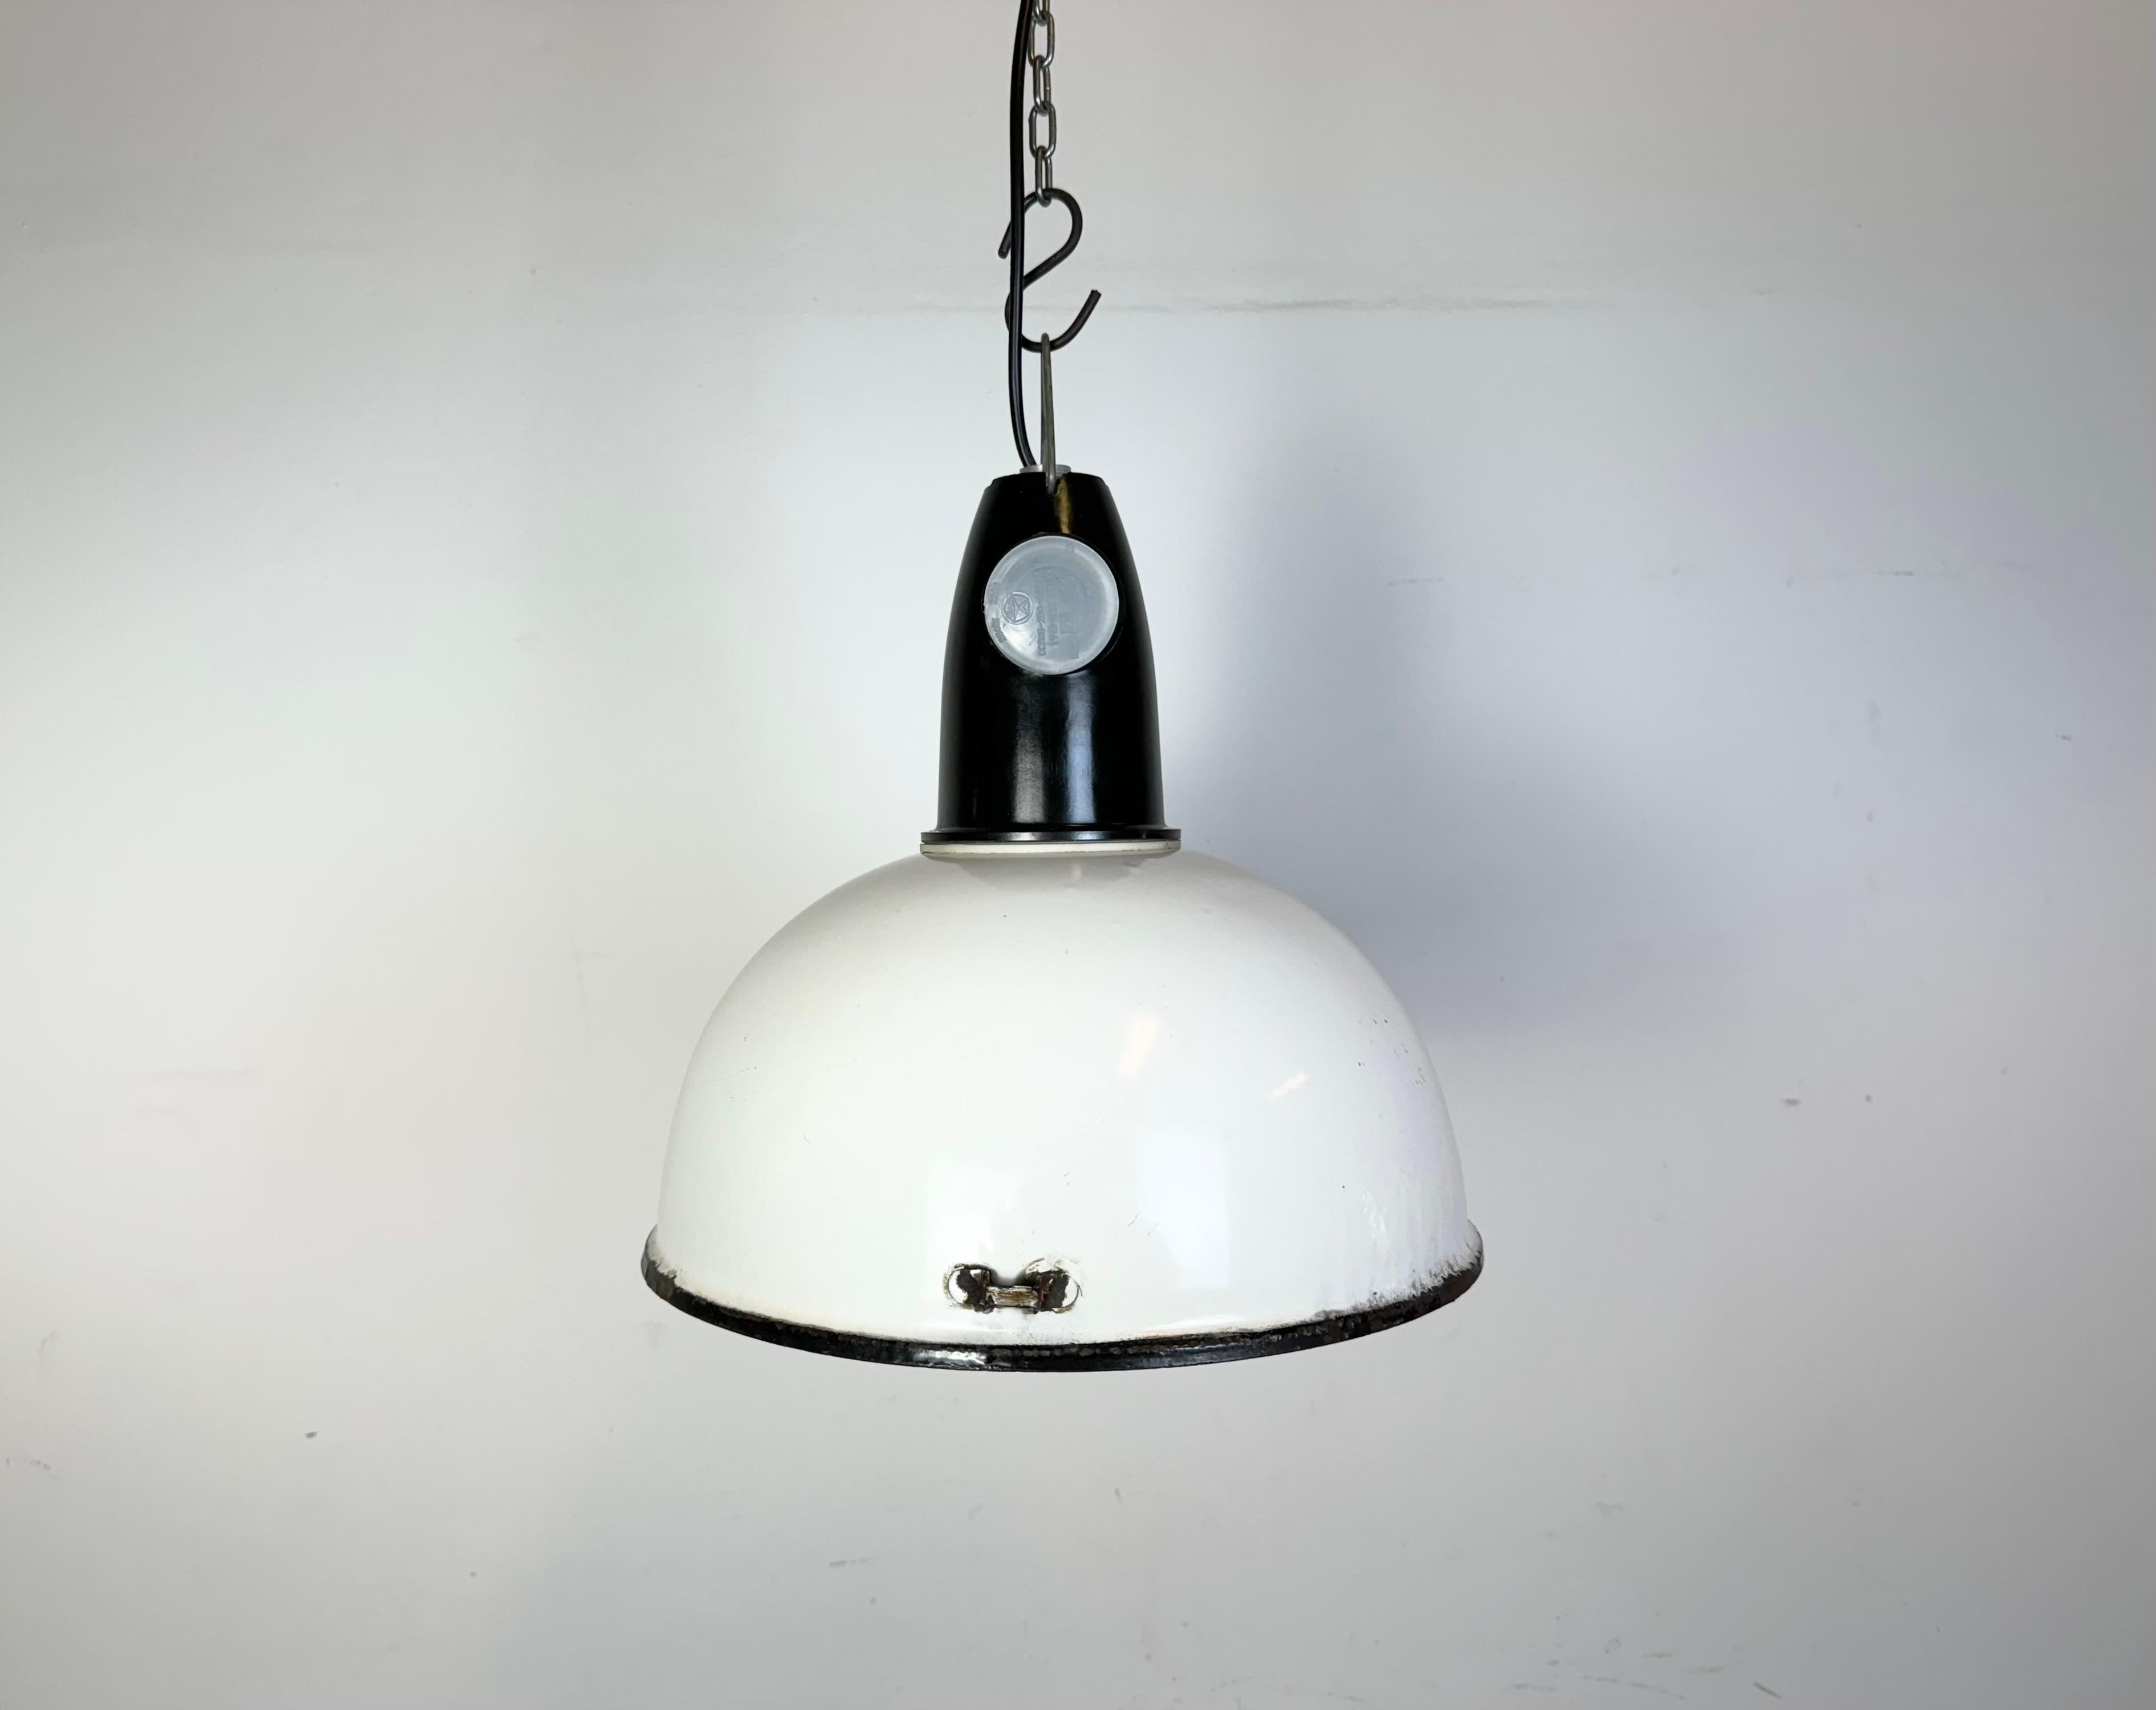 - Vintage Industrial factory light from the 1960s 
- Made in Ukraine in former Soviet Union
- White enamel shade
- Bakelite top 
- Socket requires standard E27/ E26 lightbulbs 
- New wire 
- Lampshade diameter: 31 cm
- Weight : 1,5 kg.